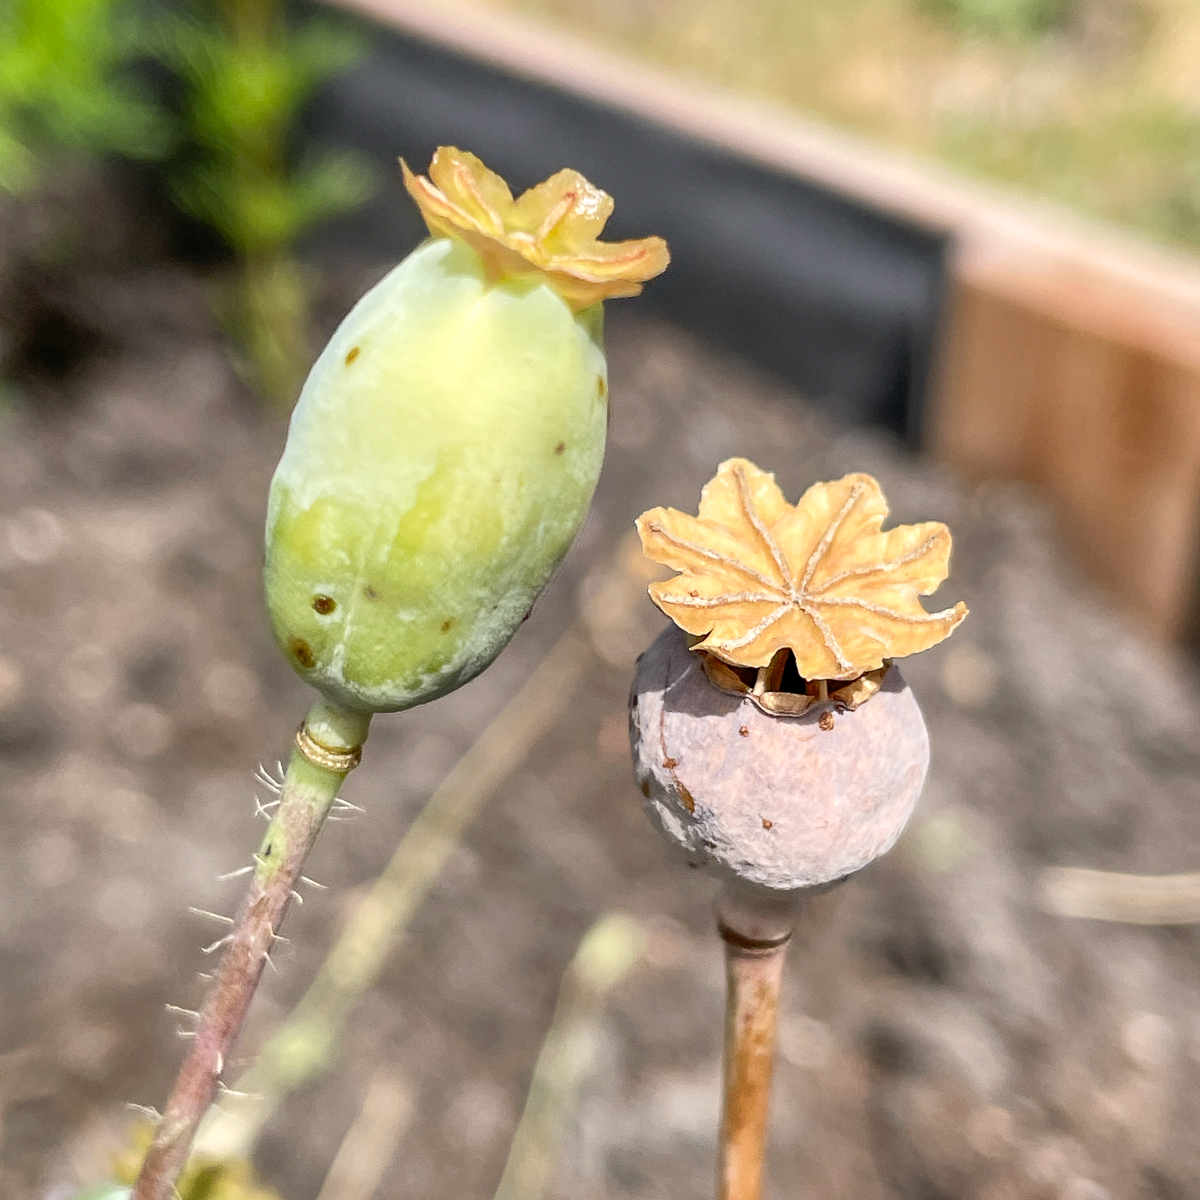 green and brown poppy seed pods